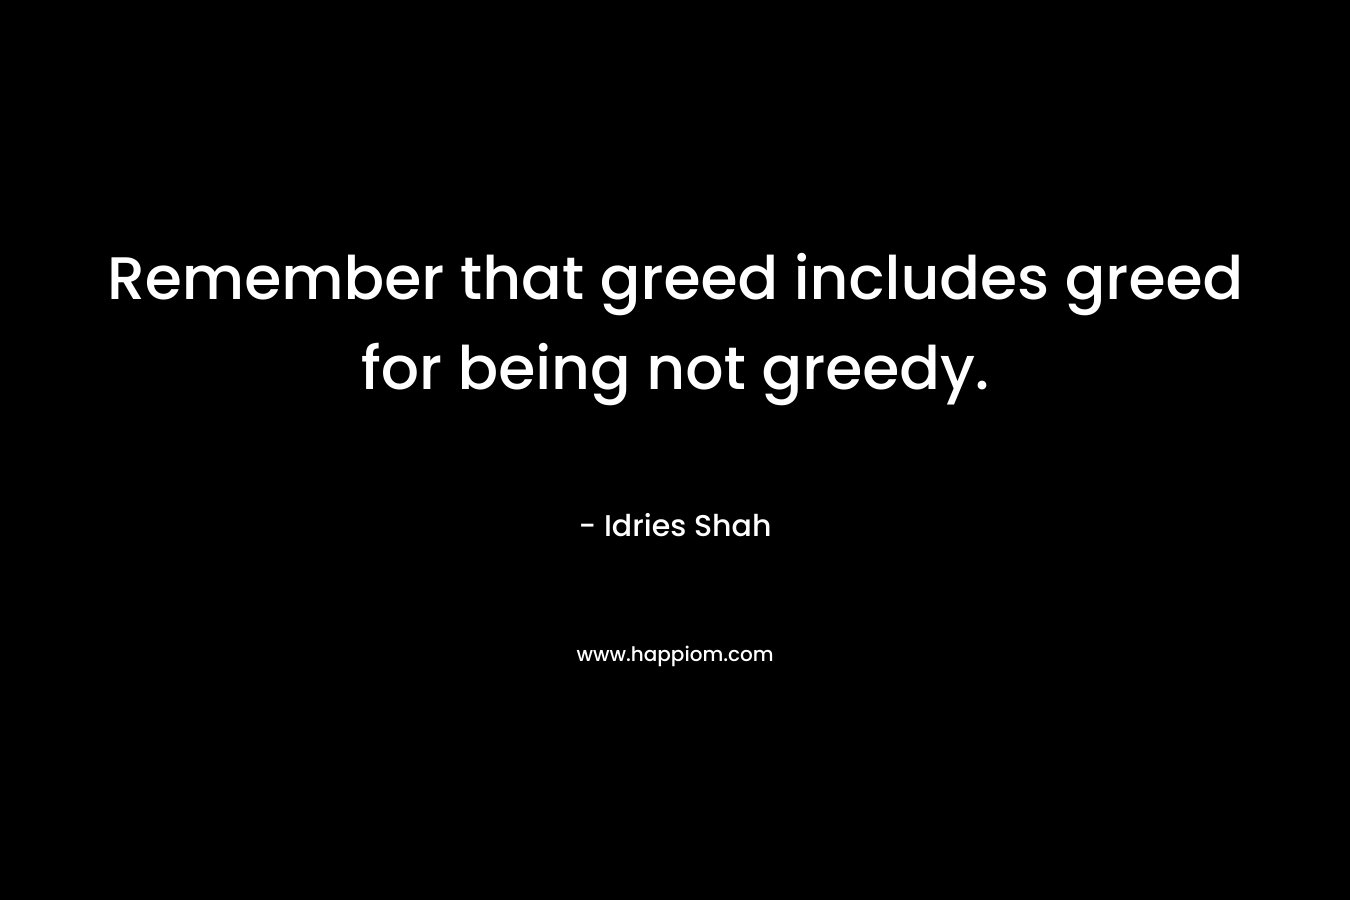 Remember that greed includes greed for being not greedy.